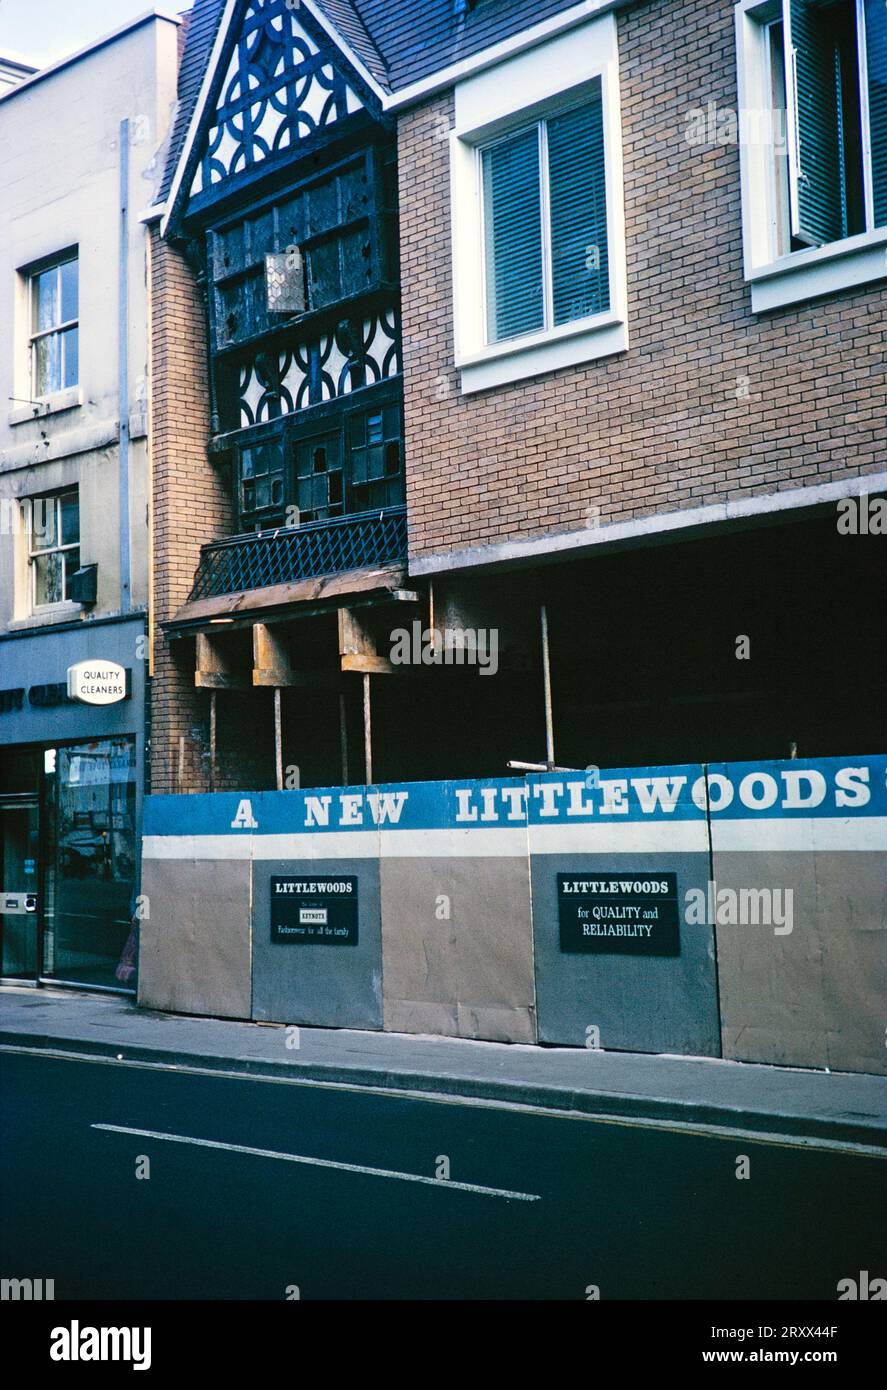 Construction site for new Littlewoods store shop, High Street, Hereford, Herefordshire, England, UK 1967 Stock Photo